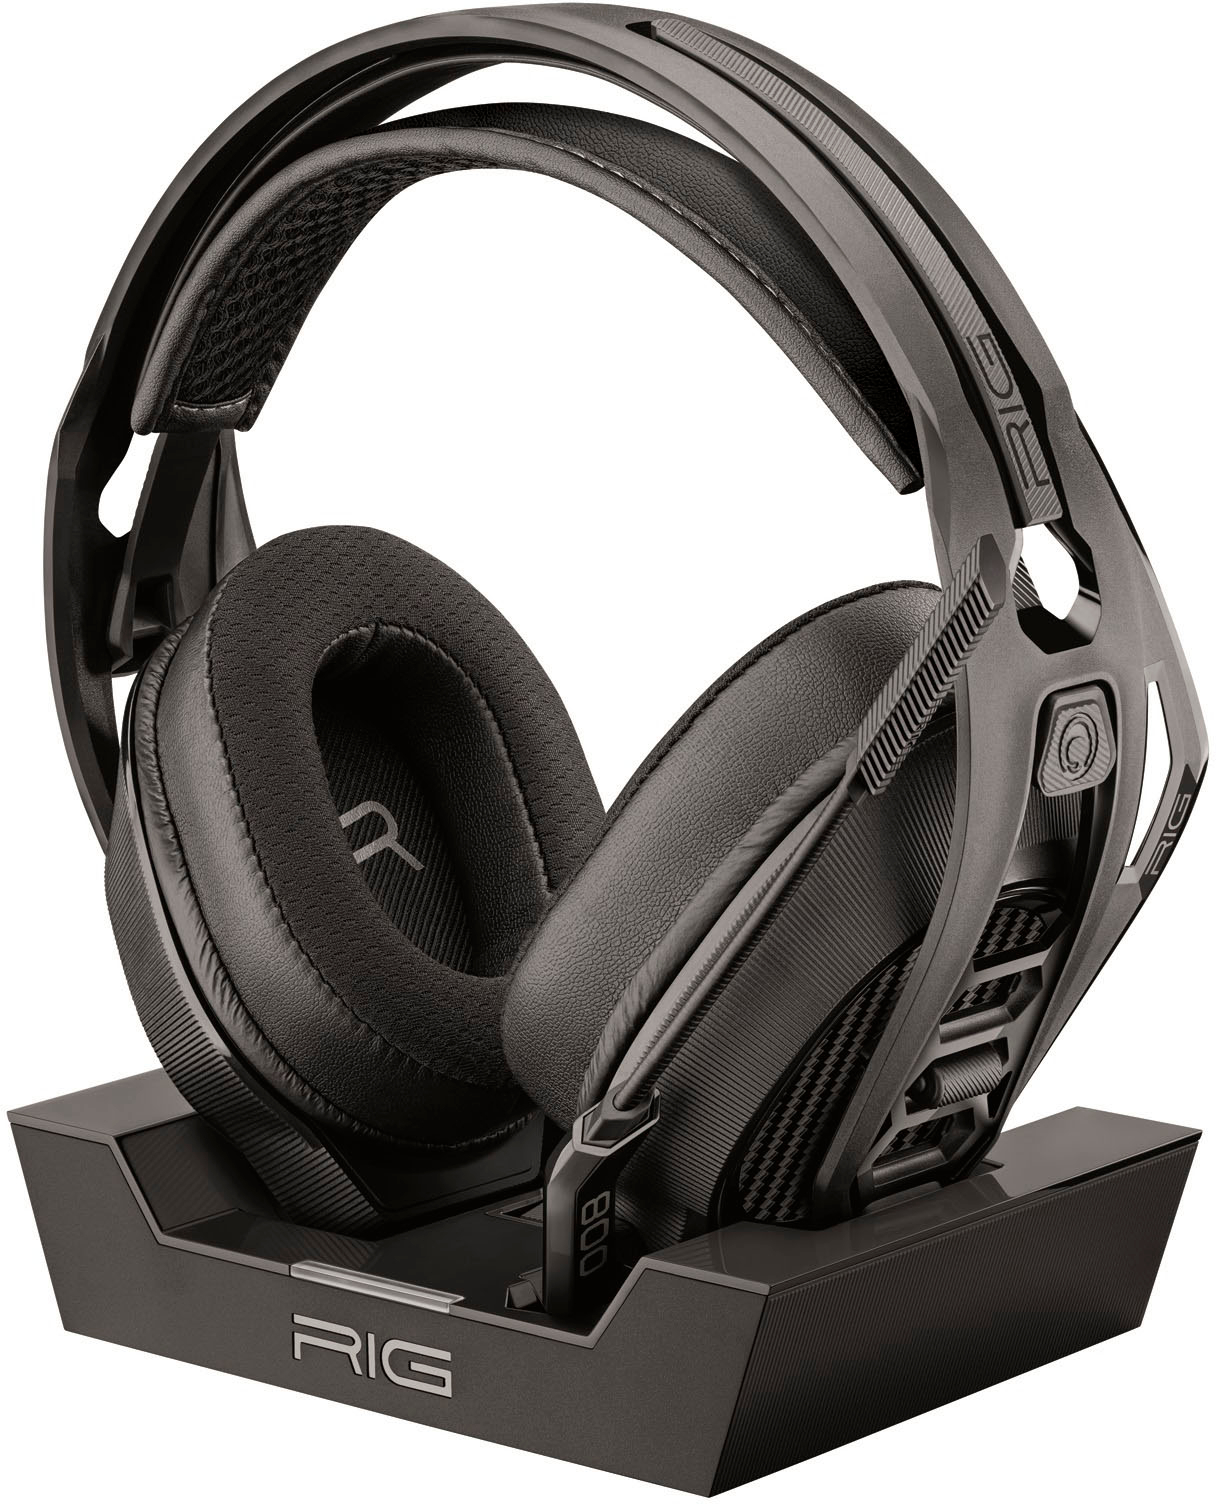 absorption mirakel tortur RIG 800 Pro HX Wireless Gaming Headset for Xbox Black 10-1172-01 - Best Buy